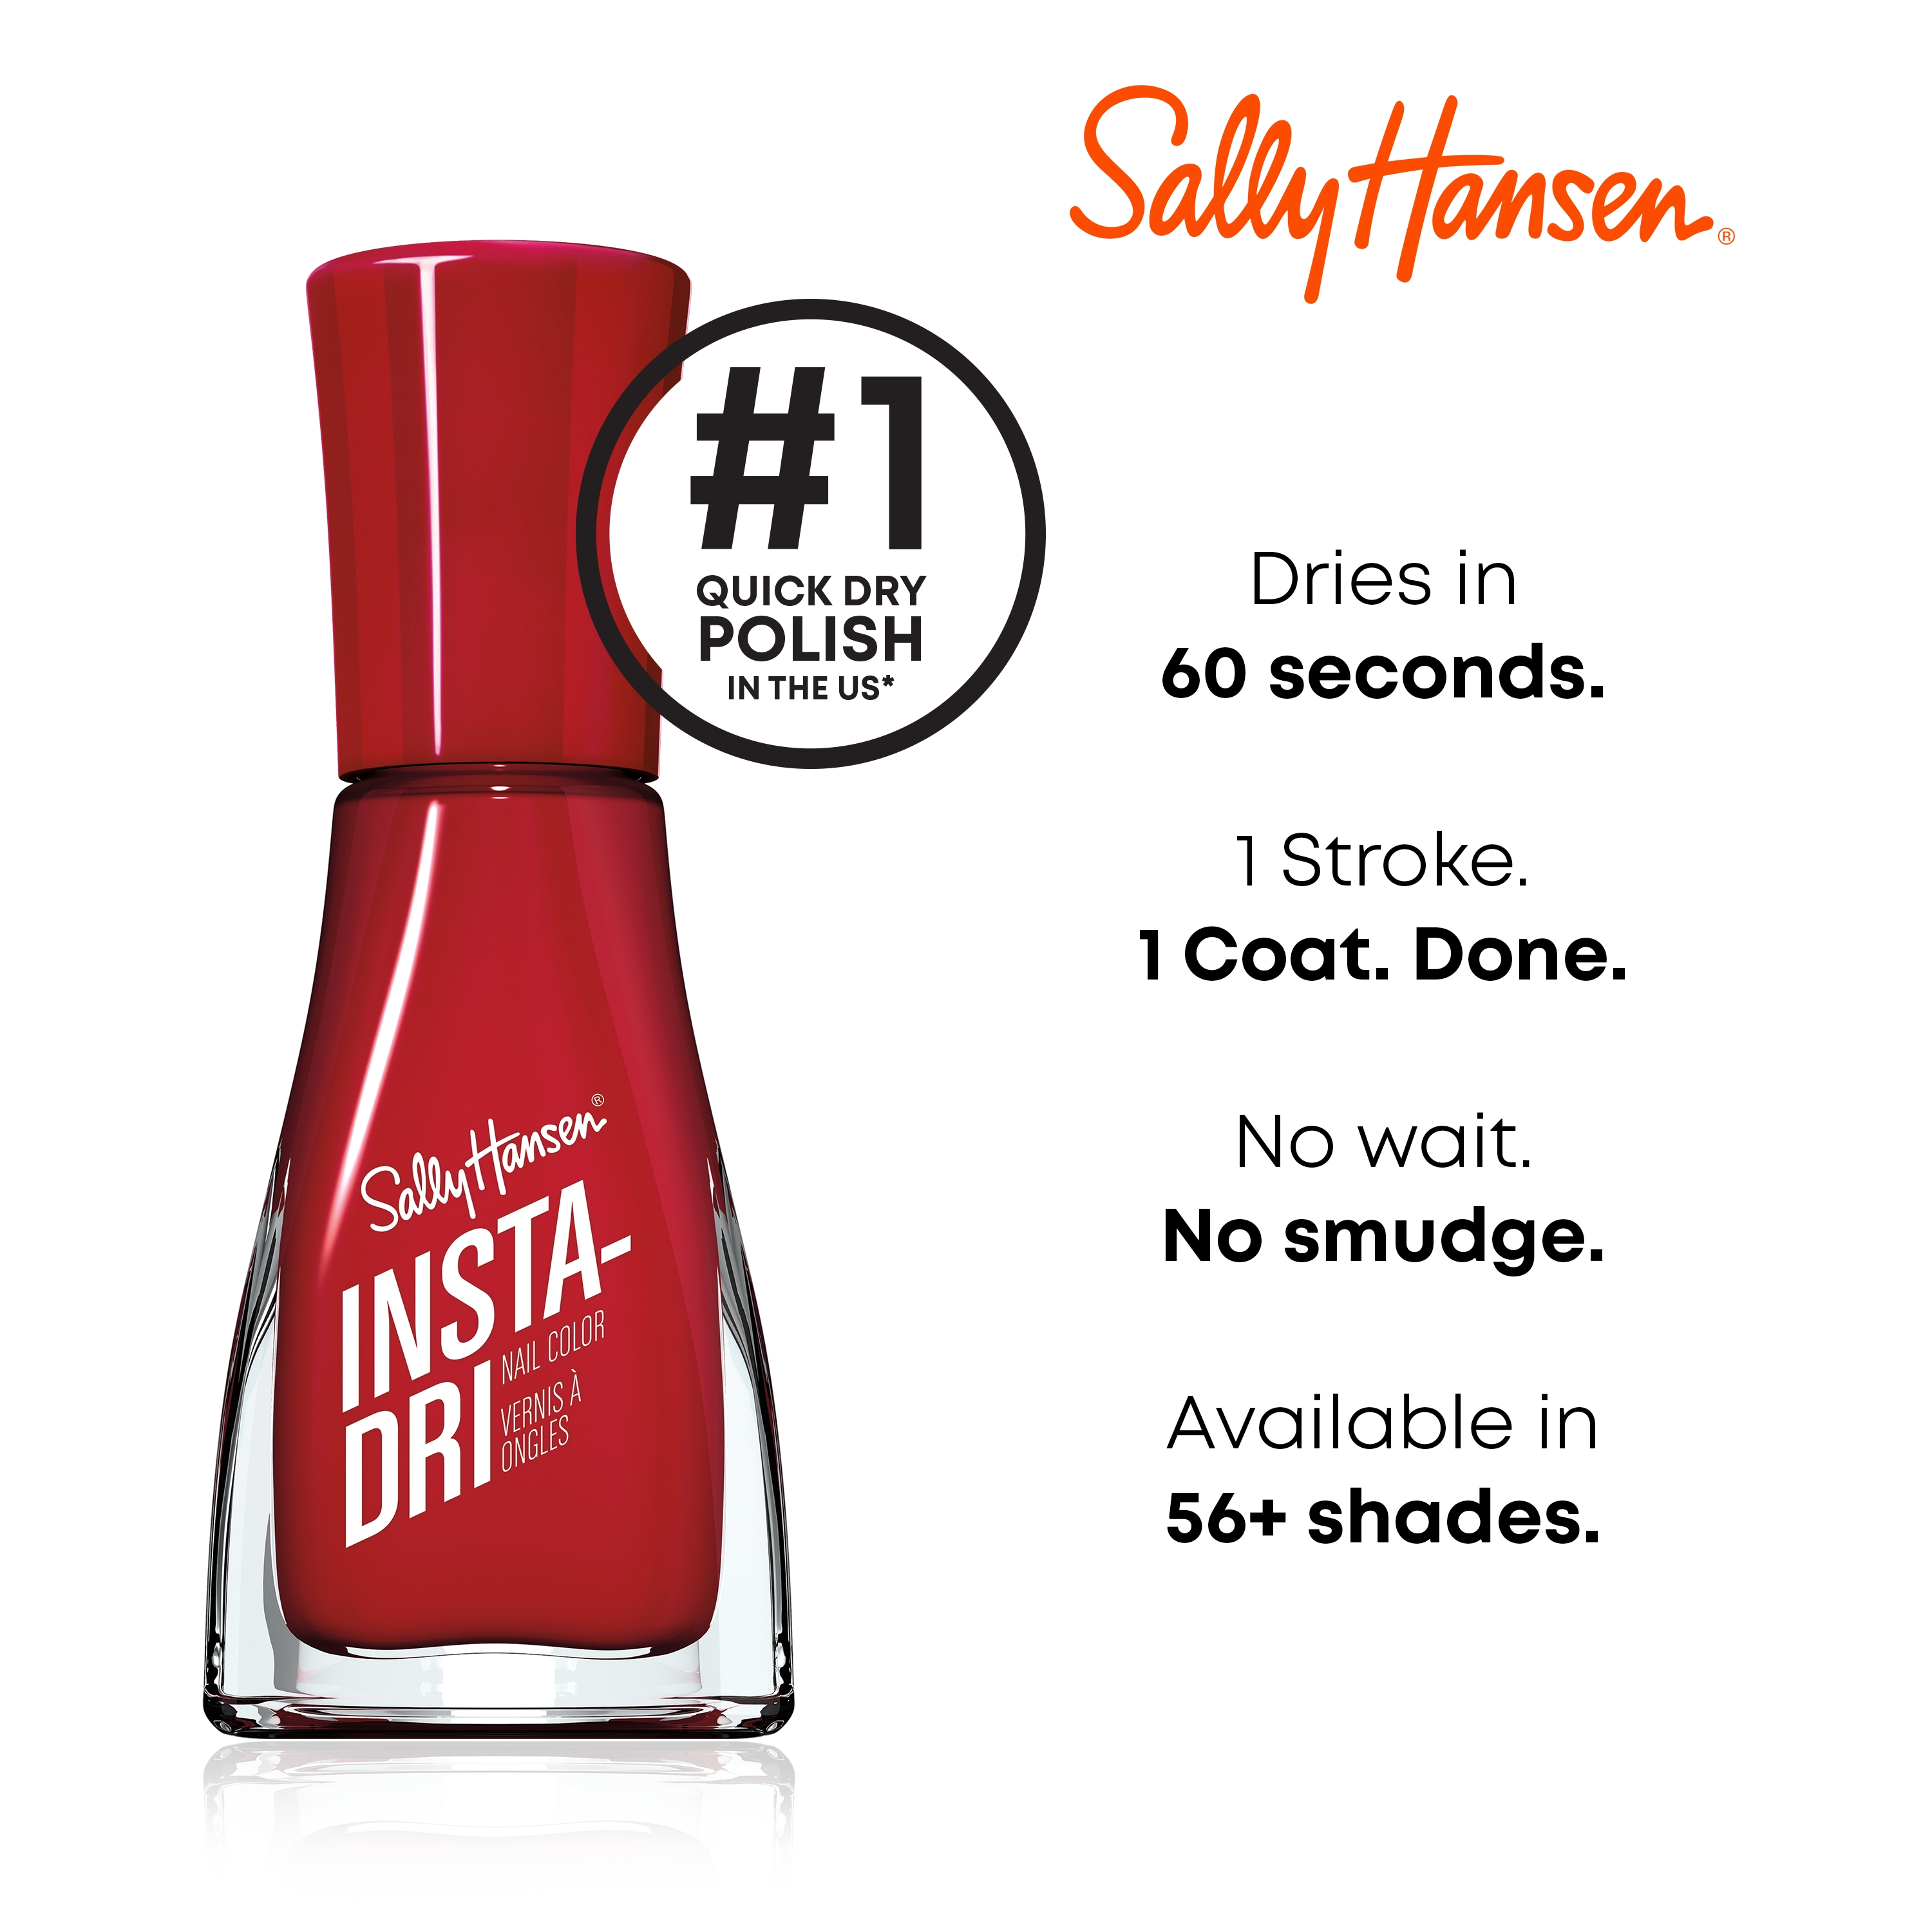 Sally Hansen Insta-Dri Nail Color, Pumped Up Pink, 3-in-1 Formula, Color Nail Polish, 0.31 Oz, Quick Dry Nail Polish, Nail Polish, Top Coat Nails, Full Coverage Formula, One Stroke, One Coat - image 3 of 14